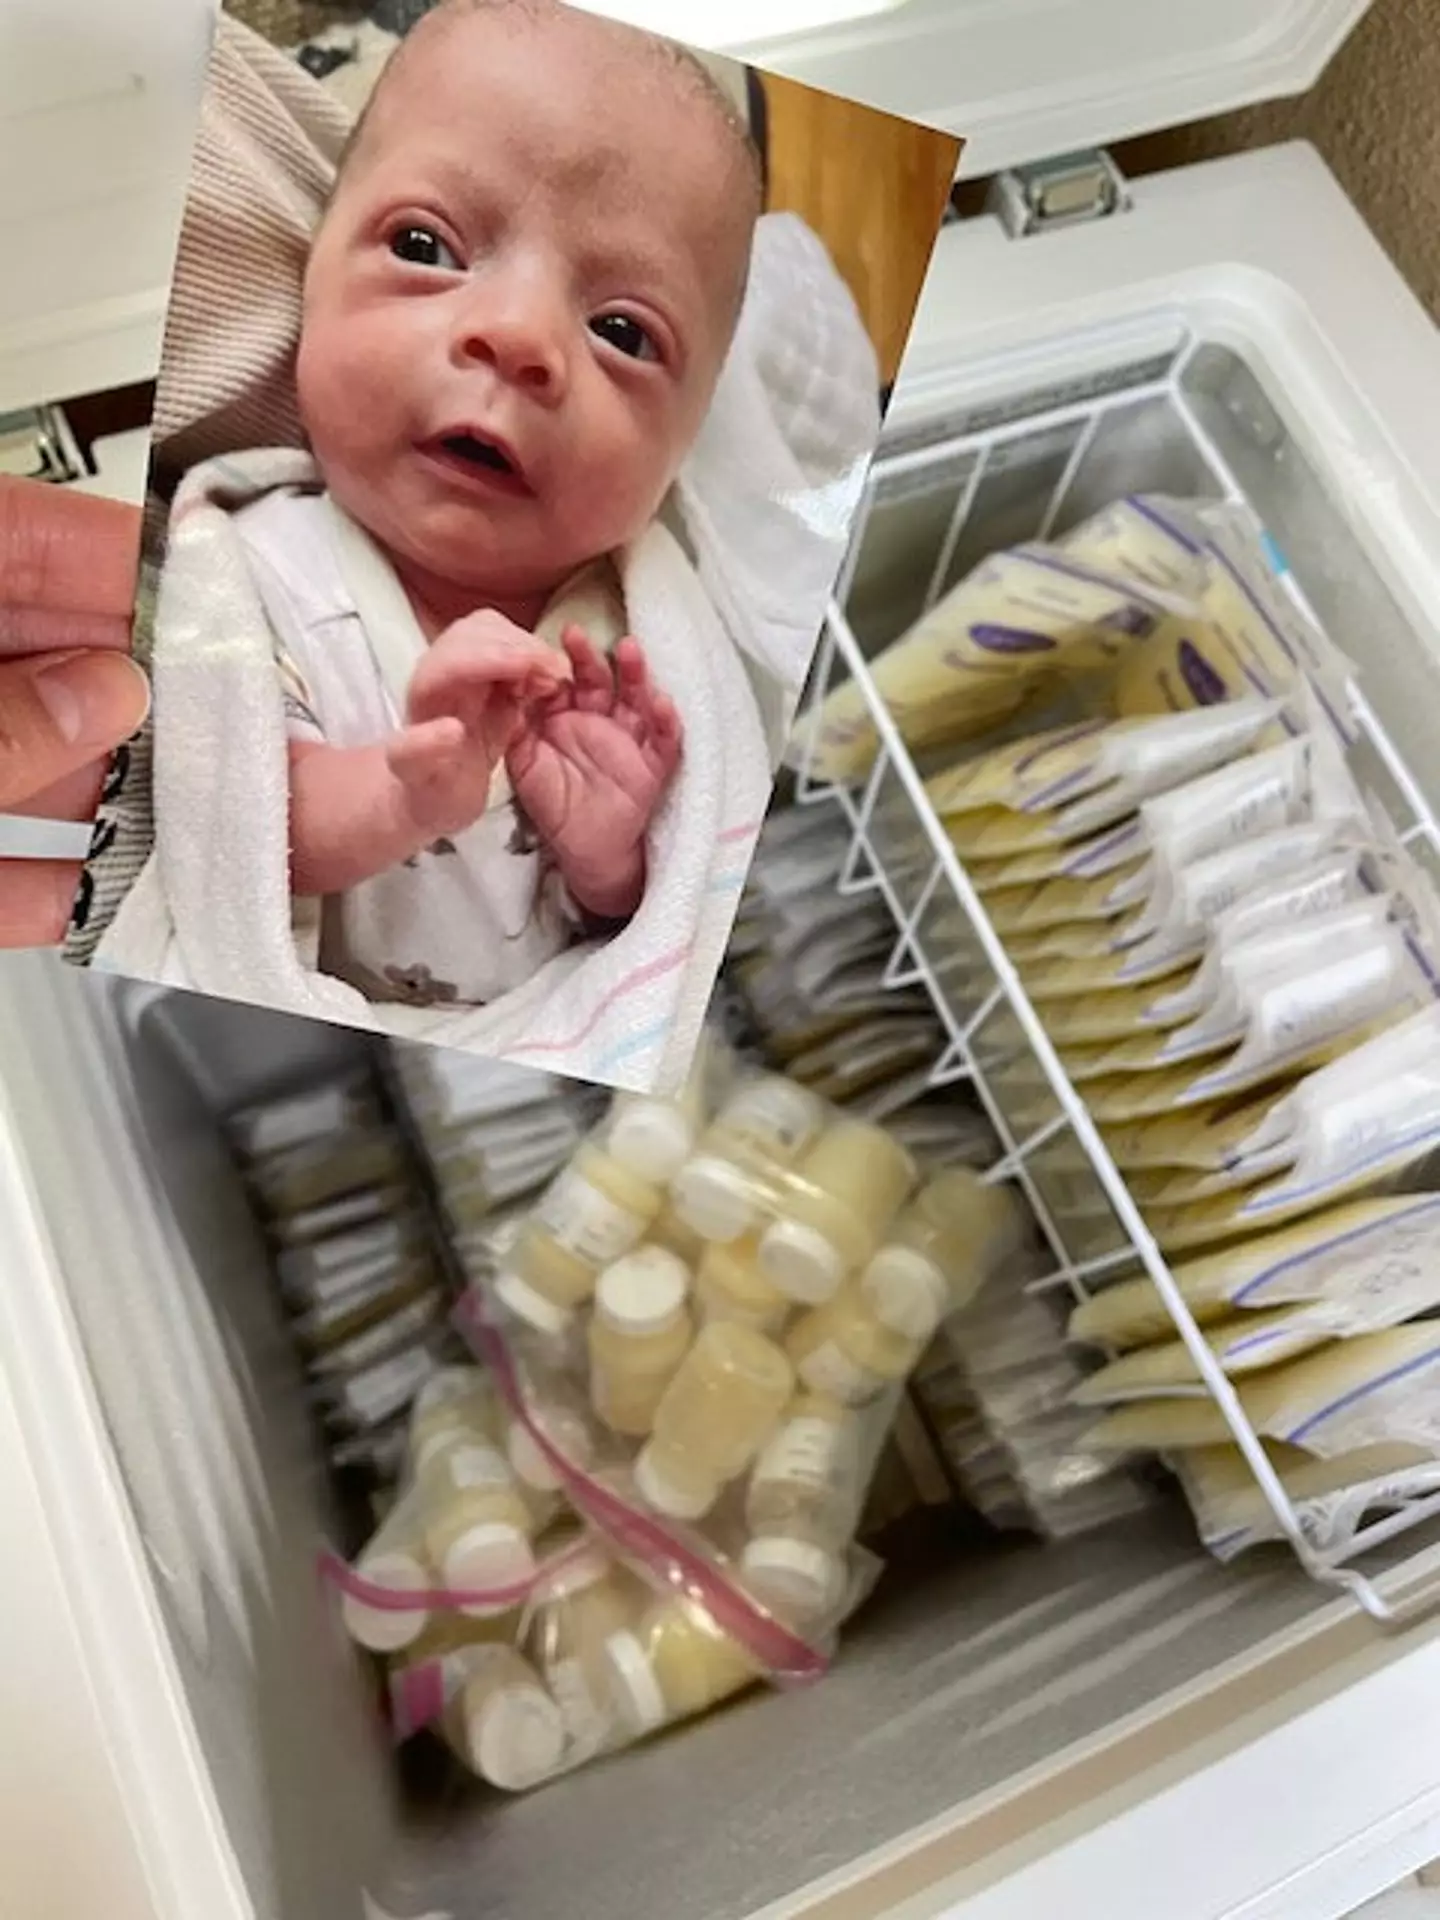 Arabella decided to bravely donate the milk to a charity to help thousands of babies (